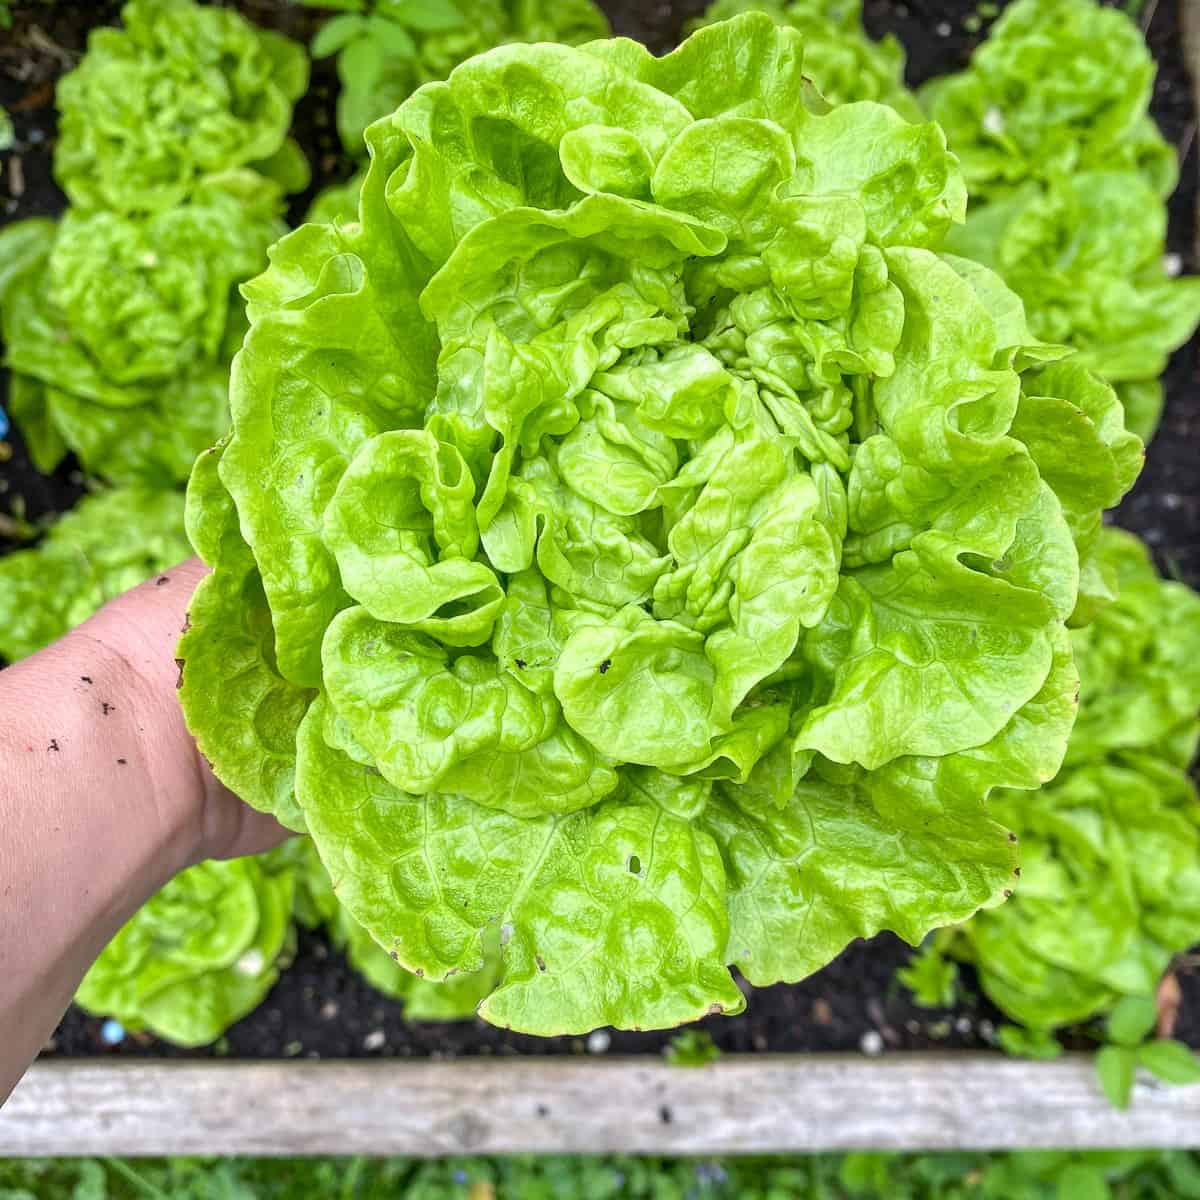 A woman's hand holding a lettuce that she has just harvested.